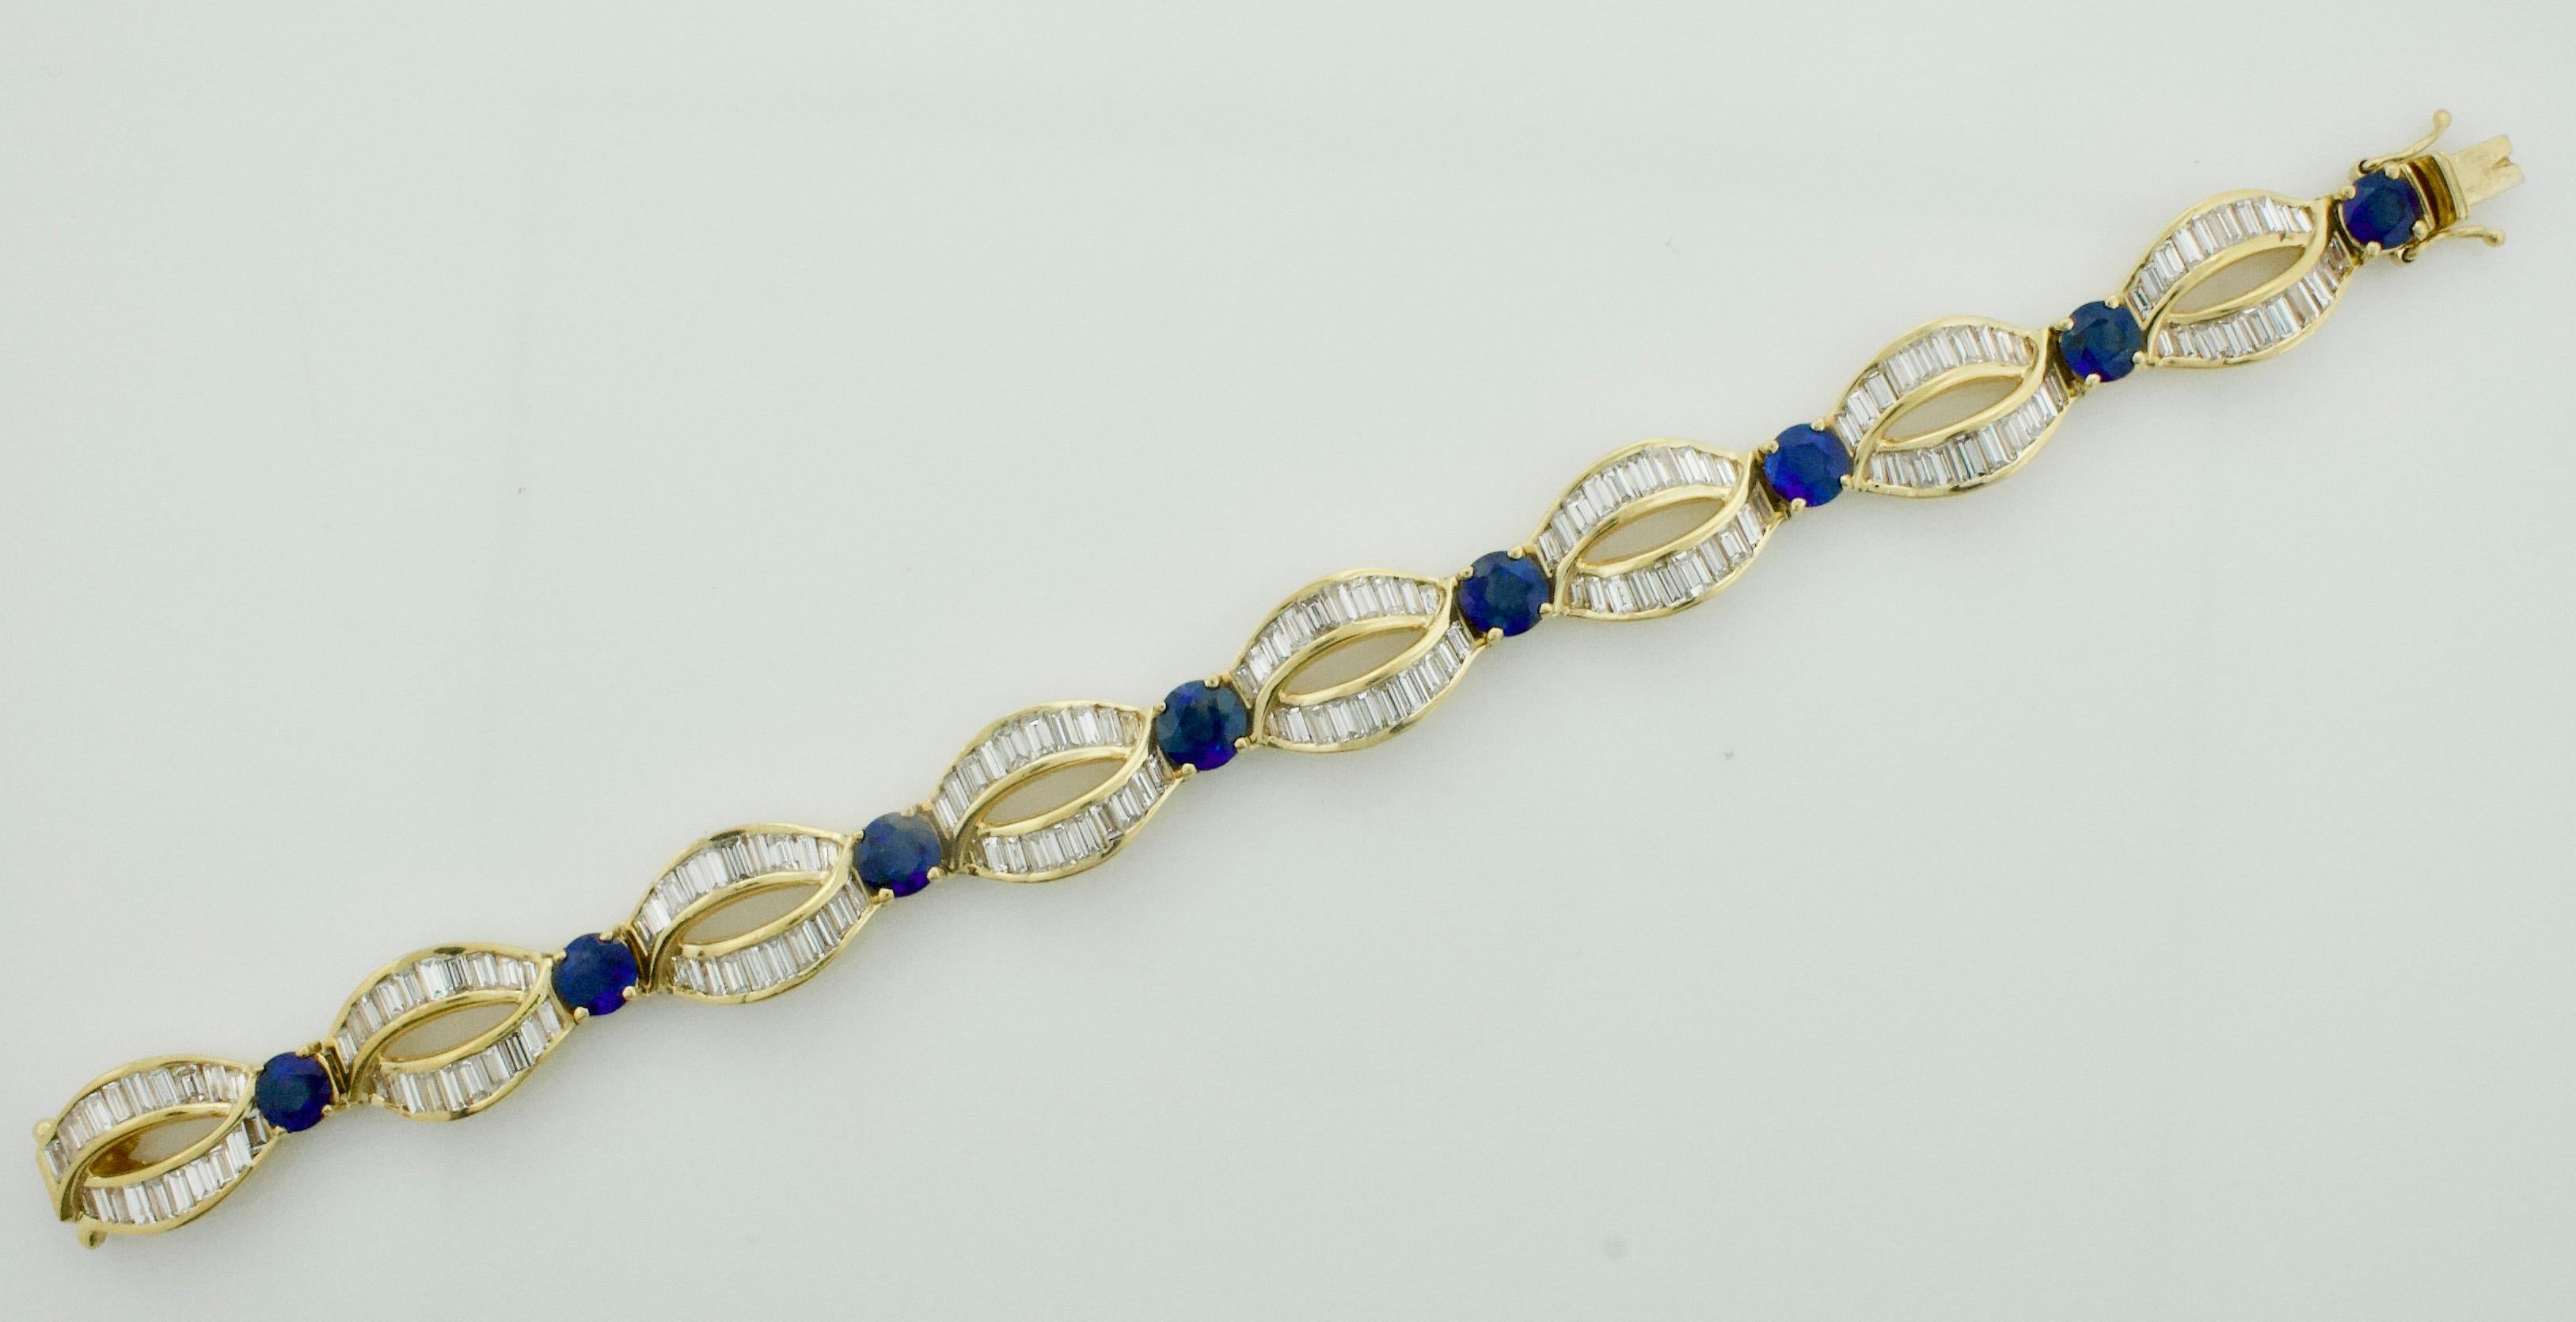 Sapphire and Diamond Bracelet in 18k Yellow Gold
Eight Round Sapphires weighing 8.00 carats approximately [bright with no imperfections visible to the naked eye]
One Hundred and Sixty Baguette Cut Diamonds weighing 11.20 carats approximately [GHI  -